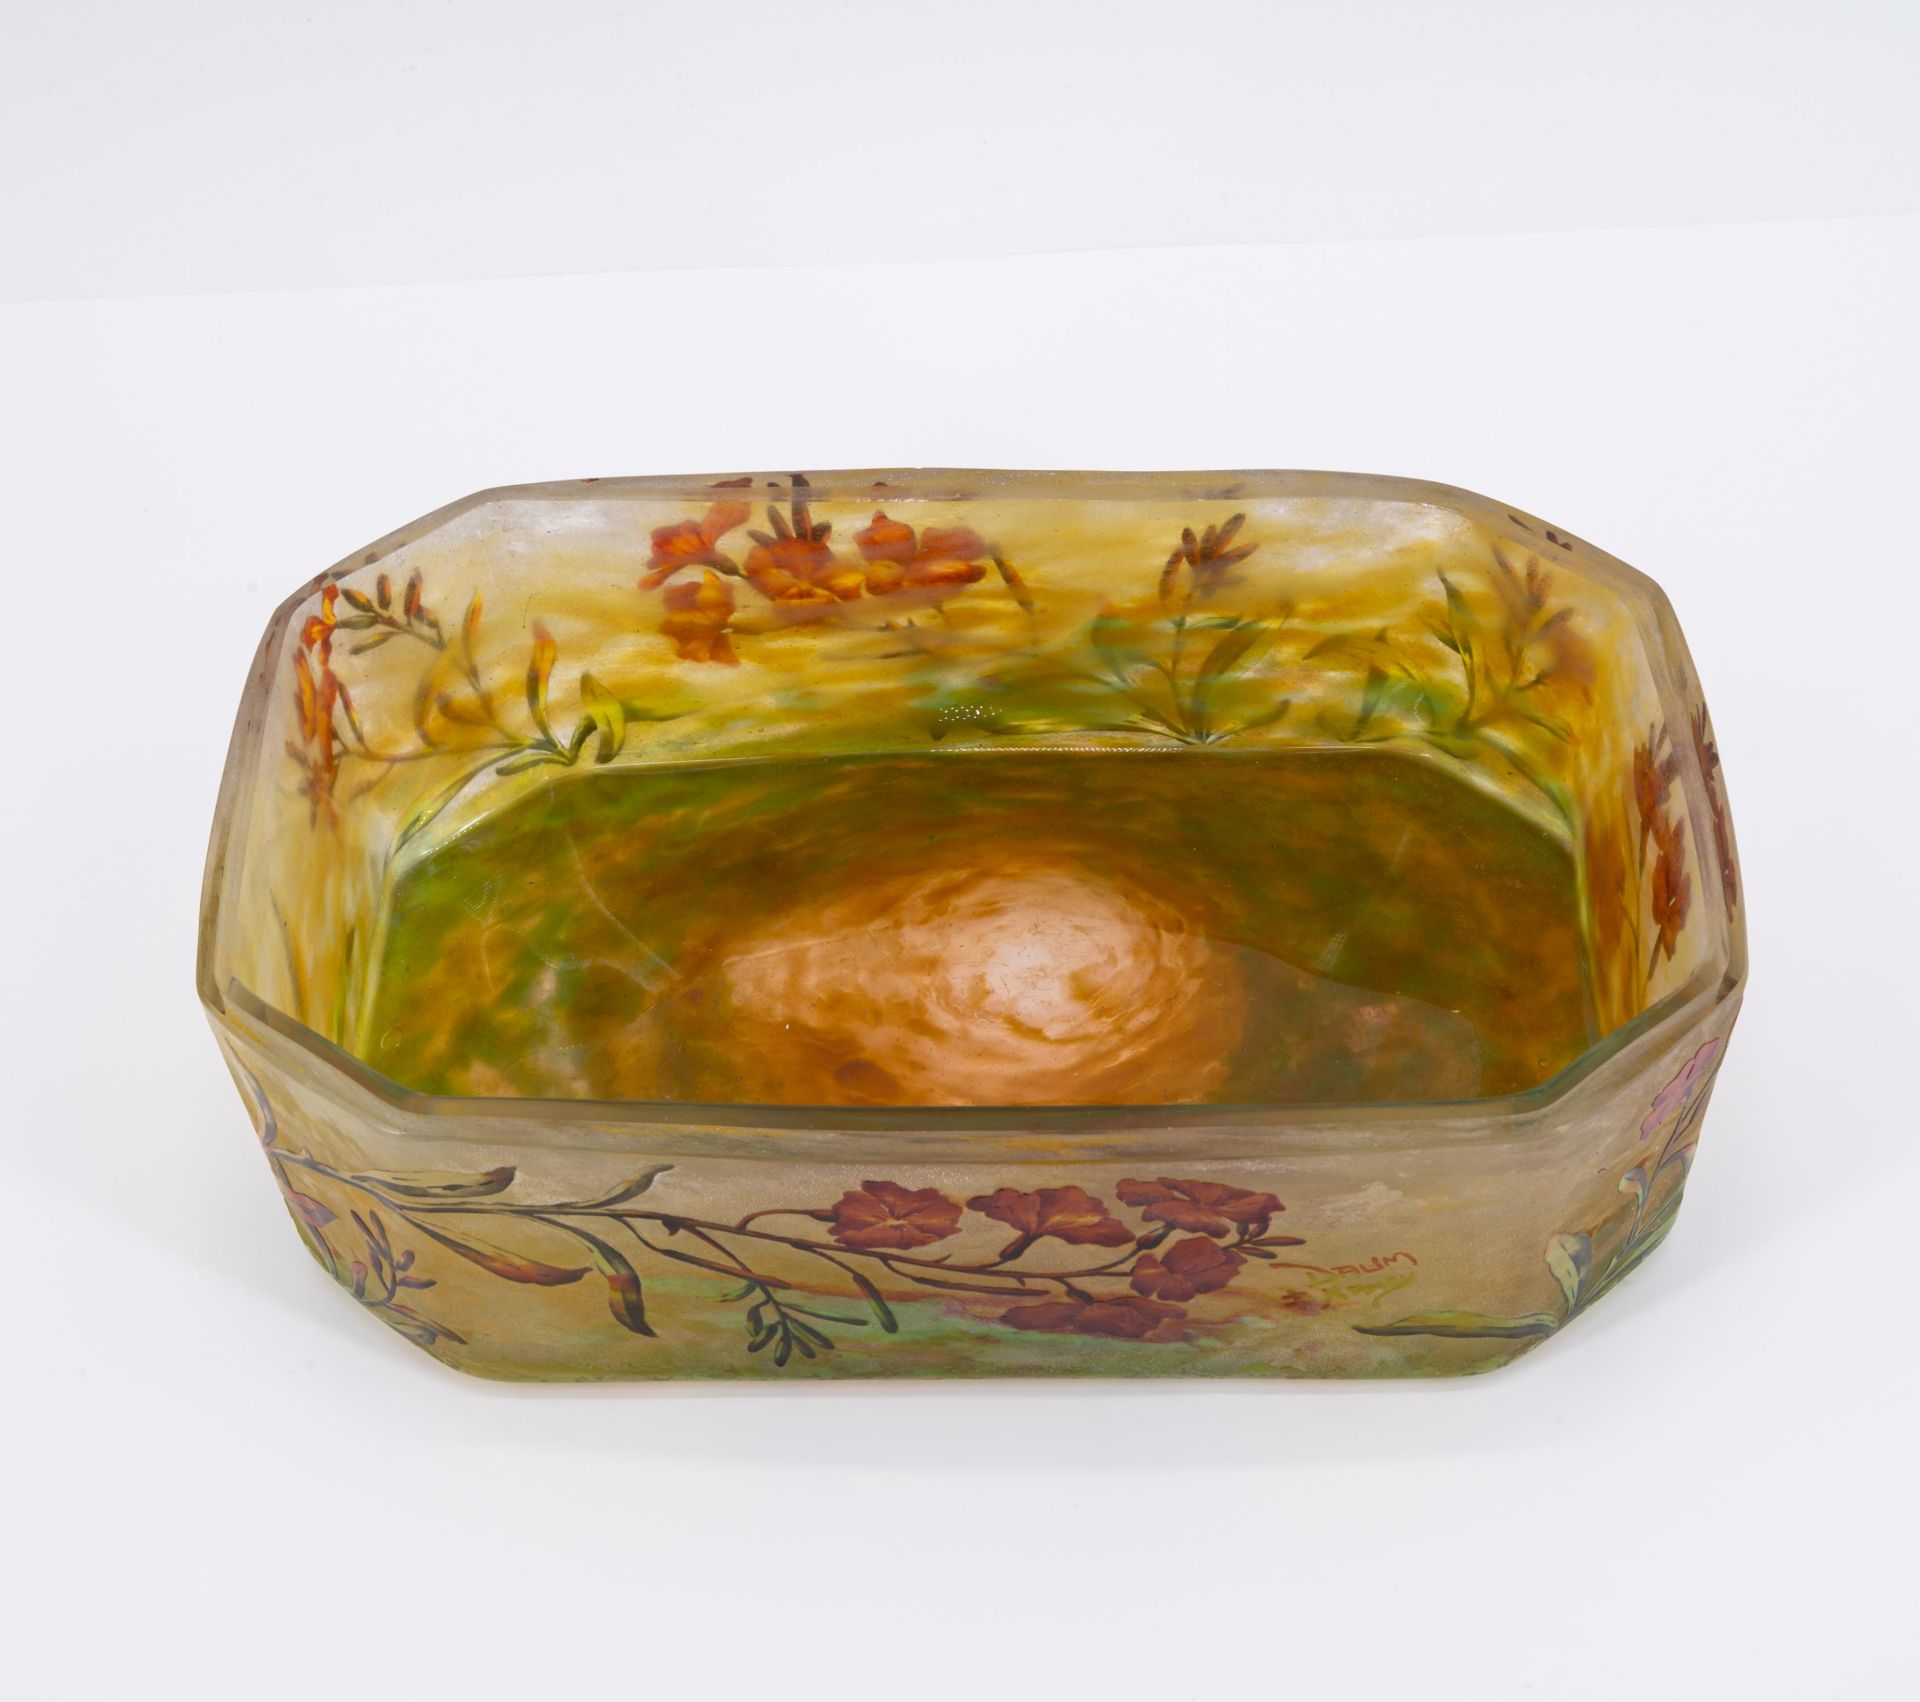 GLASS JARDINIERE WITH FLORAL DECOR - Image 5 of 7